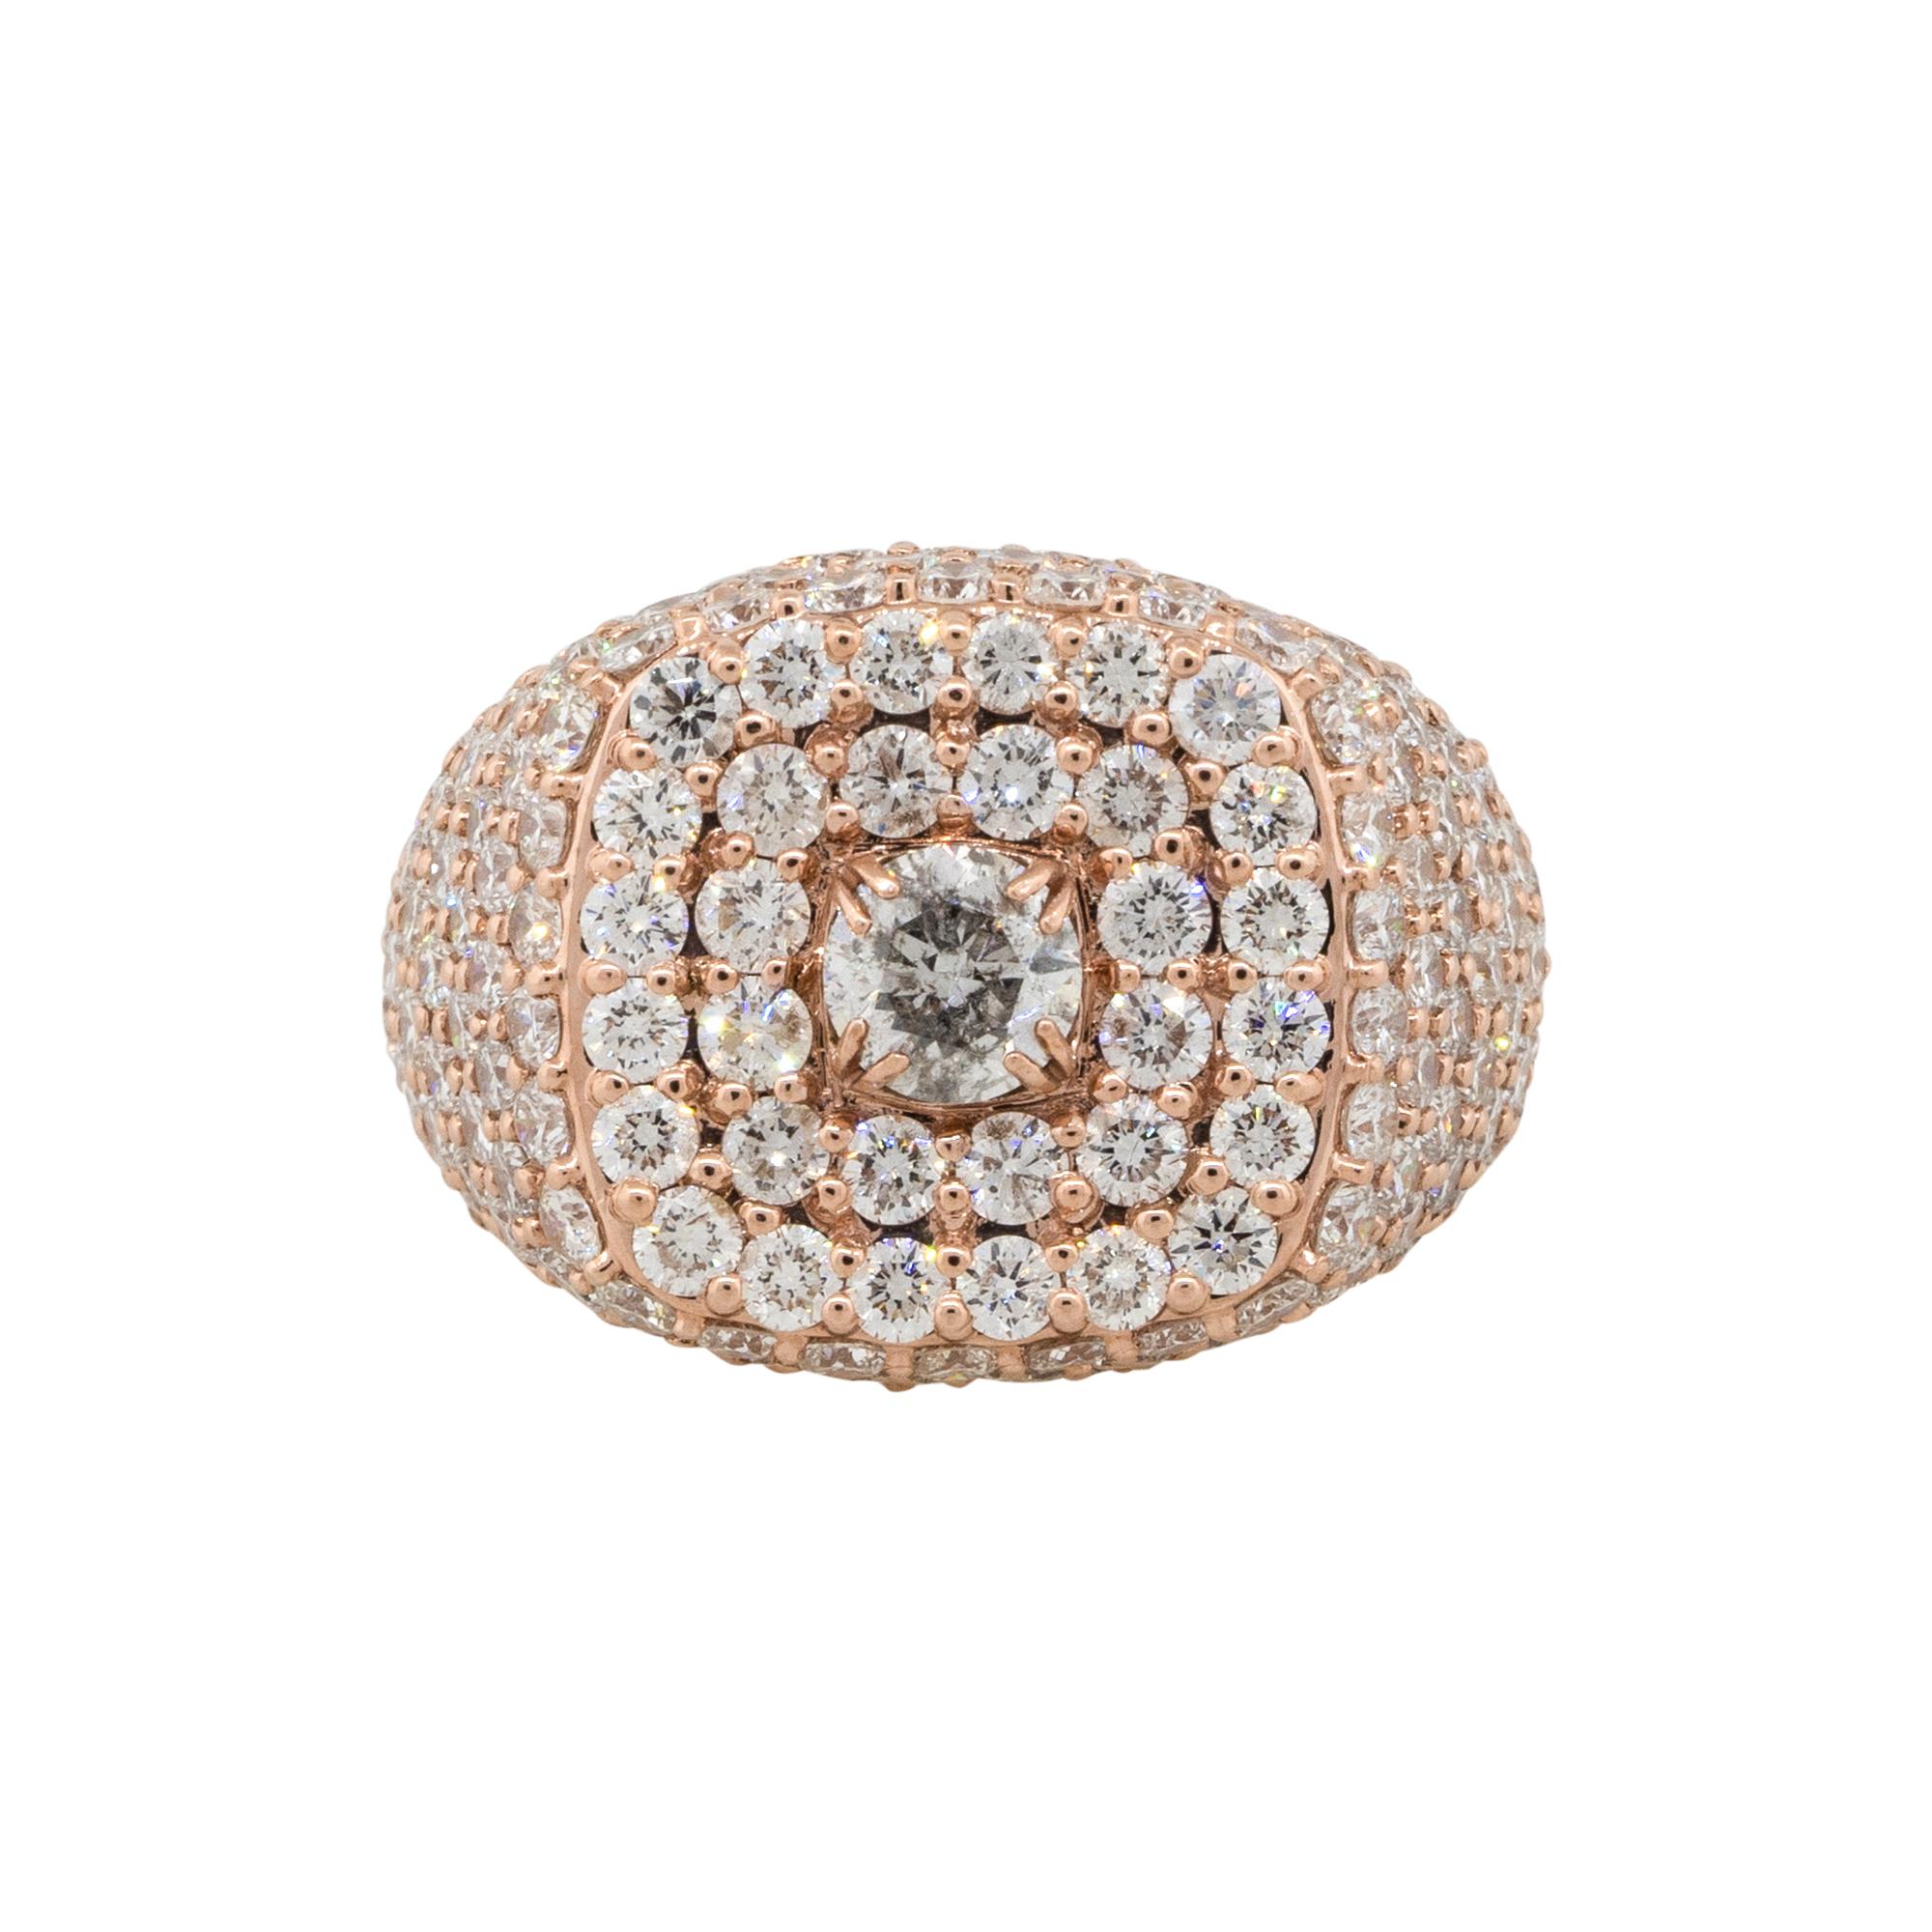 Material: 14k Rose Gold
Diamond Details: Approx. 12.78ctw round cut Diamonds. Diamonds are G/H in color and SI/VS in clarity.
Size: 8.75
Measurements: 26.75mm x 19mm x 31mm
Weight: 12.7g (8.2dwt) 
Additional Details: This item comes with a